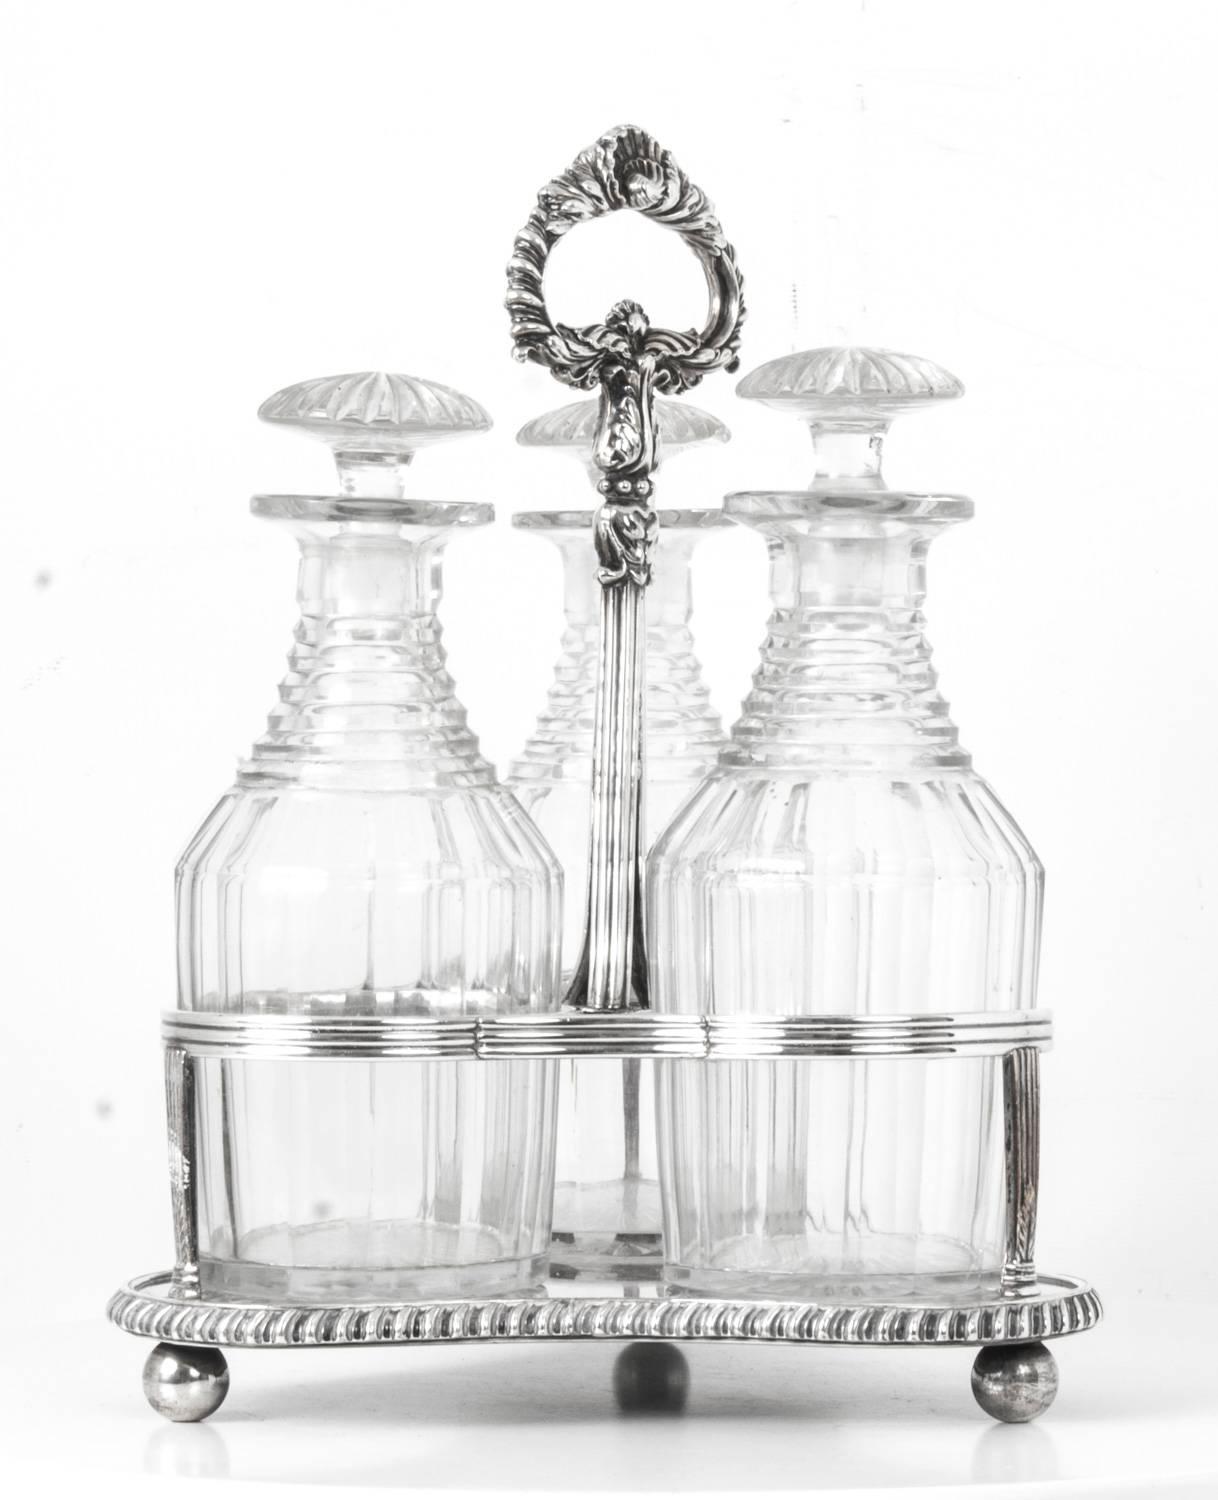 This is an attractive silver plated Georgr IV Old Sheffield silver plate trefoil three bottle decanter Stand with three cut-glass decanters by the renowned designer and silversmith Matthew Boulton, circa 1820 in date.

The silver plated decanter